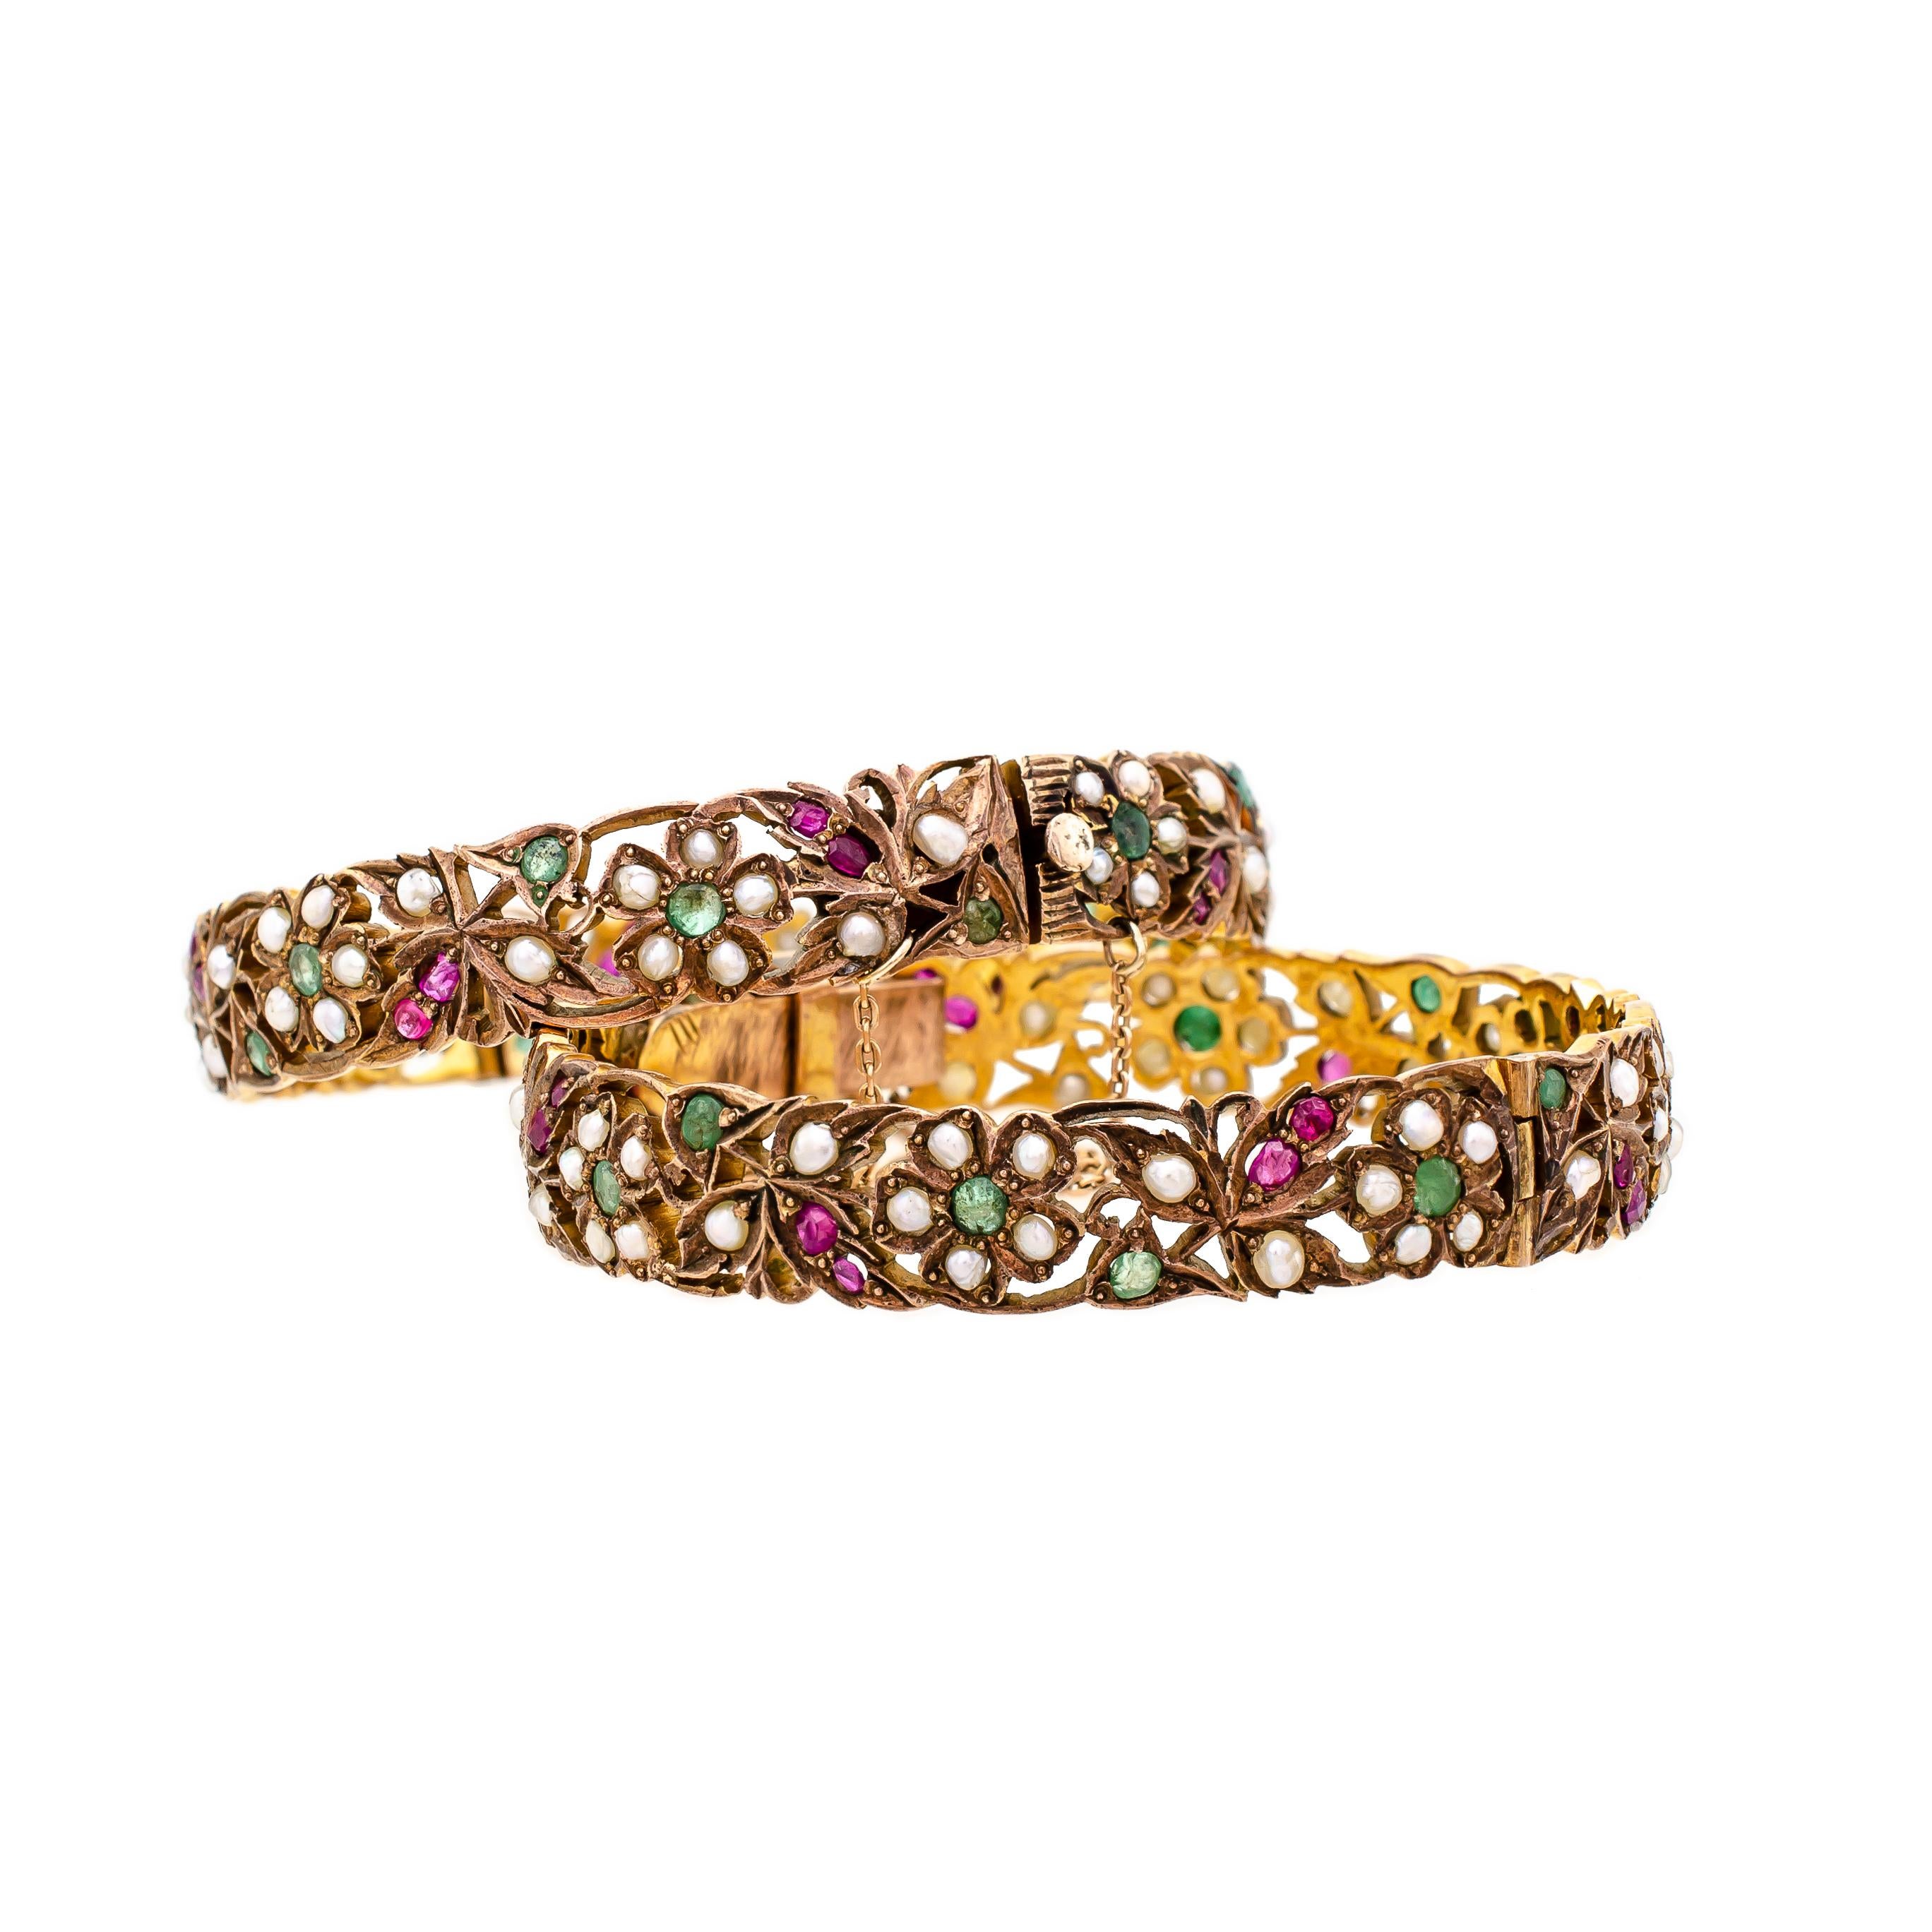 Exquisite, stylish vintage pair of silver-gilt and gem-set bangle bracelets from India. Each hinged set with beautiful emeralds, lovely rubies, and elegant seed pearls. Both bangles have hidden clasps and gold safety chains. These handcrafted